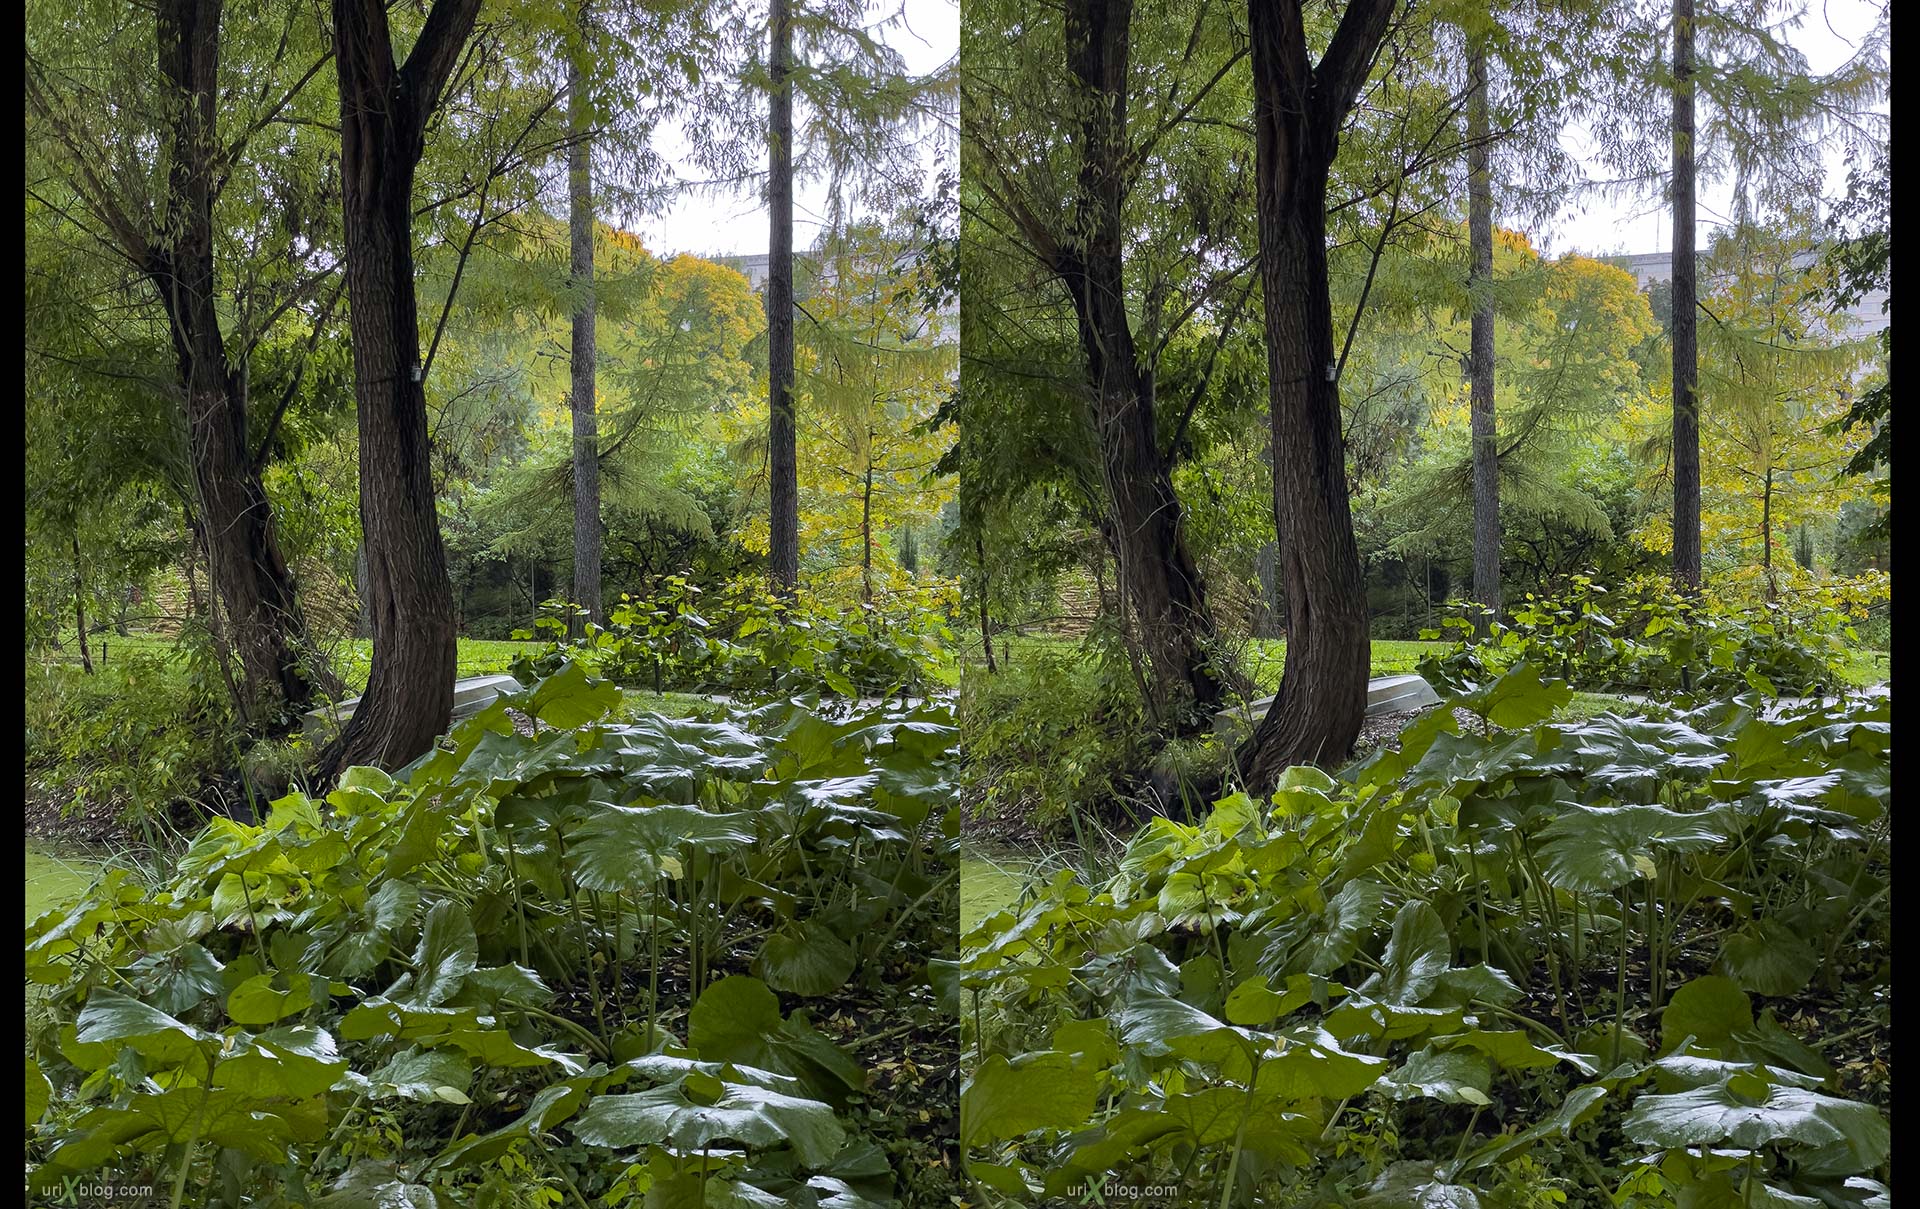 Pharmaceutical Garden, Russia, Moscow, 3D, stereo pair, cross-eyed, crossview, cross view stereo pair, stereoscopic